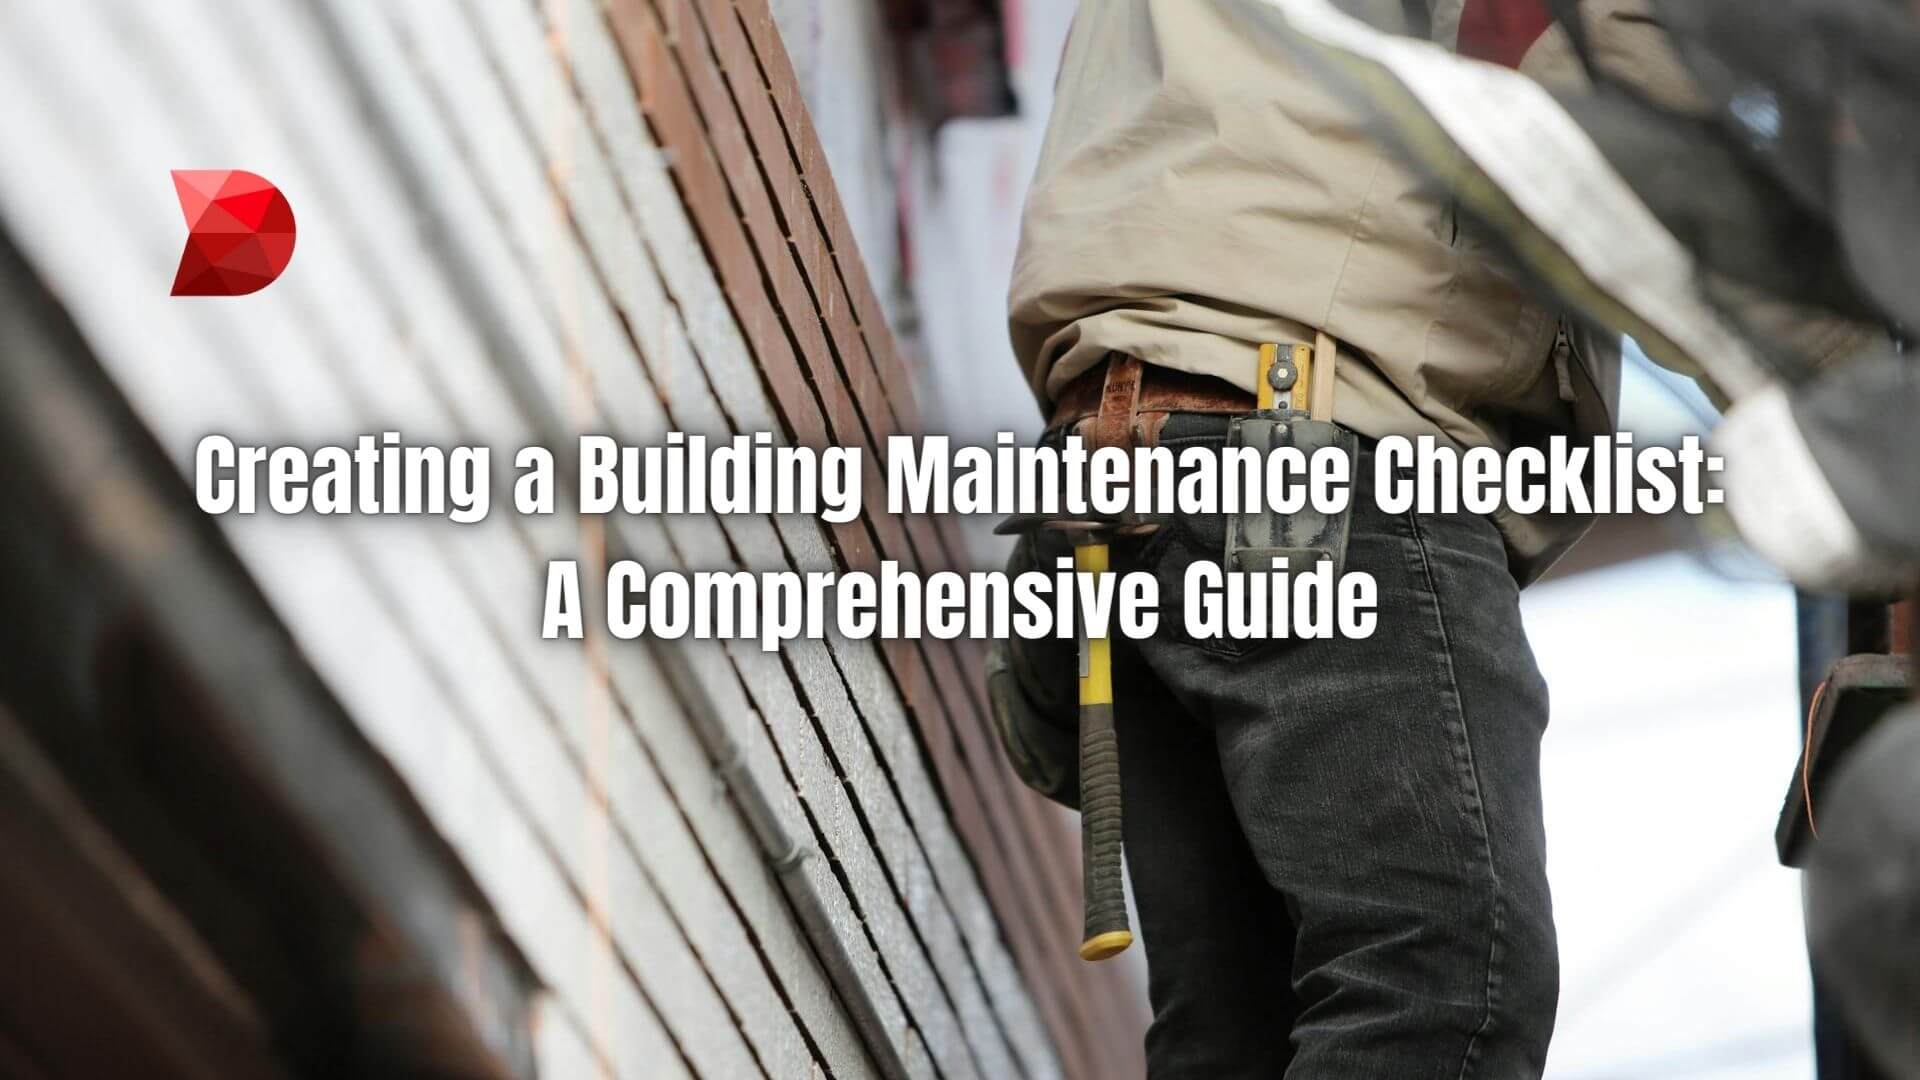 Ensure your property stays in top condition! Discover essential steps for efficient building maintenance with our comprehensive checklist.